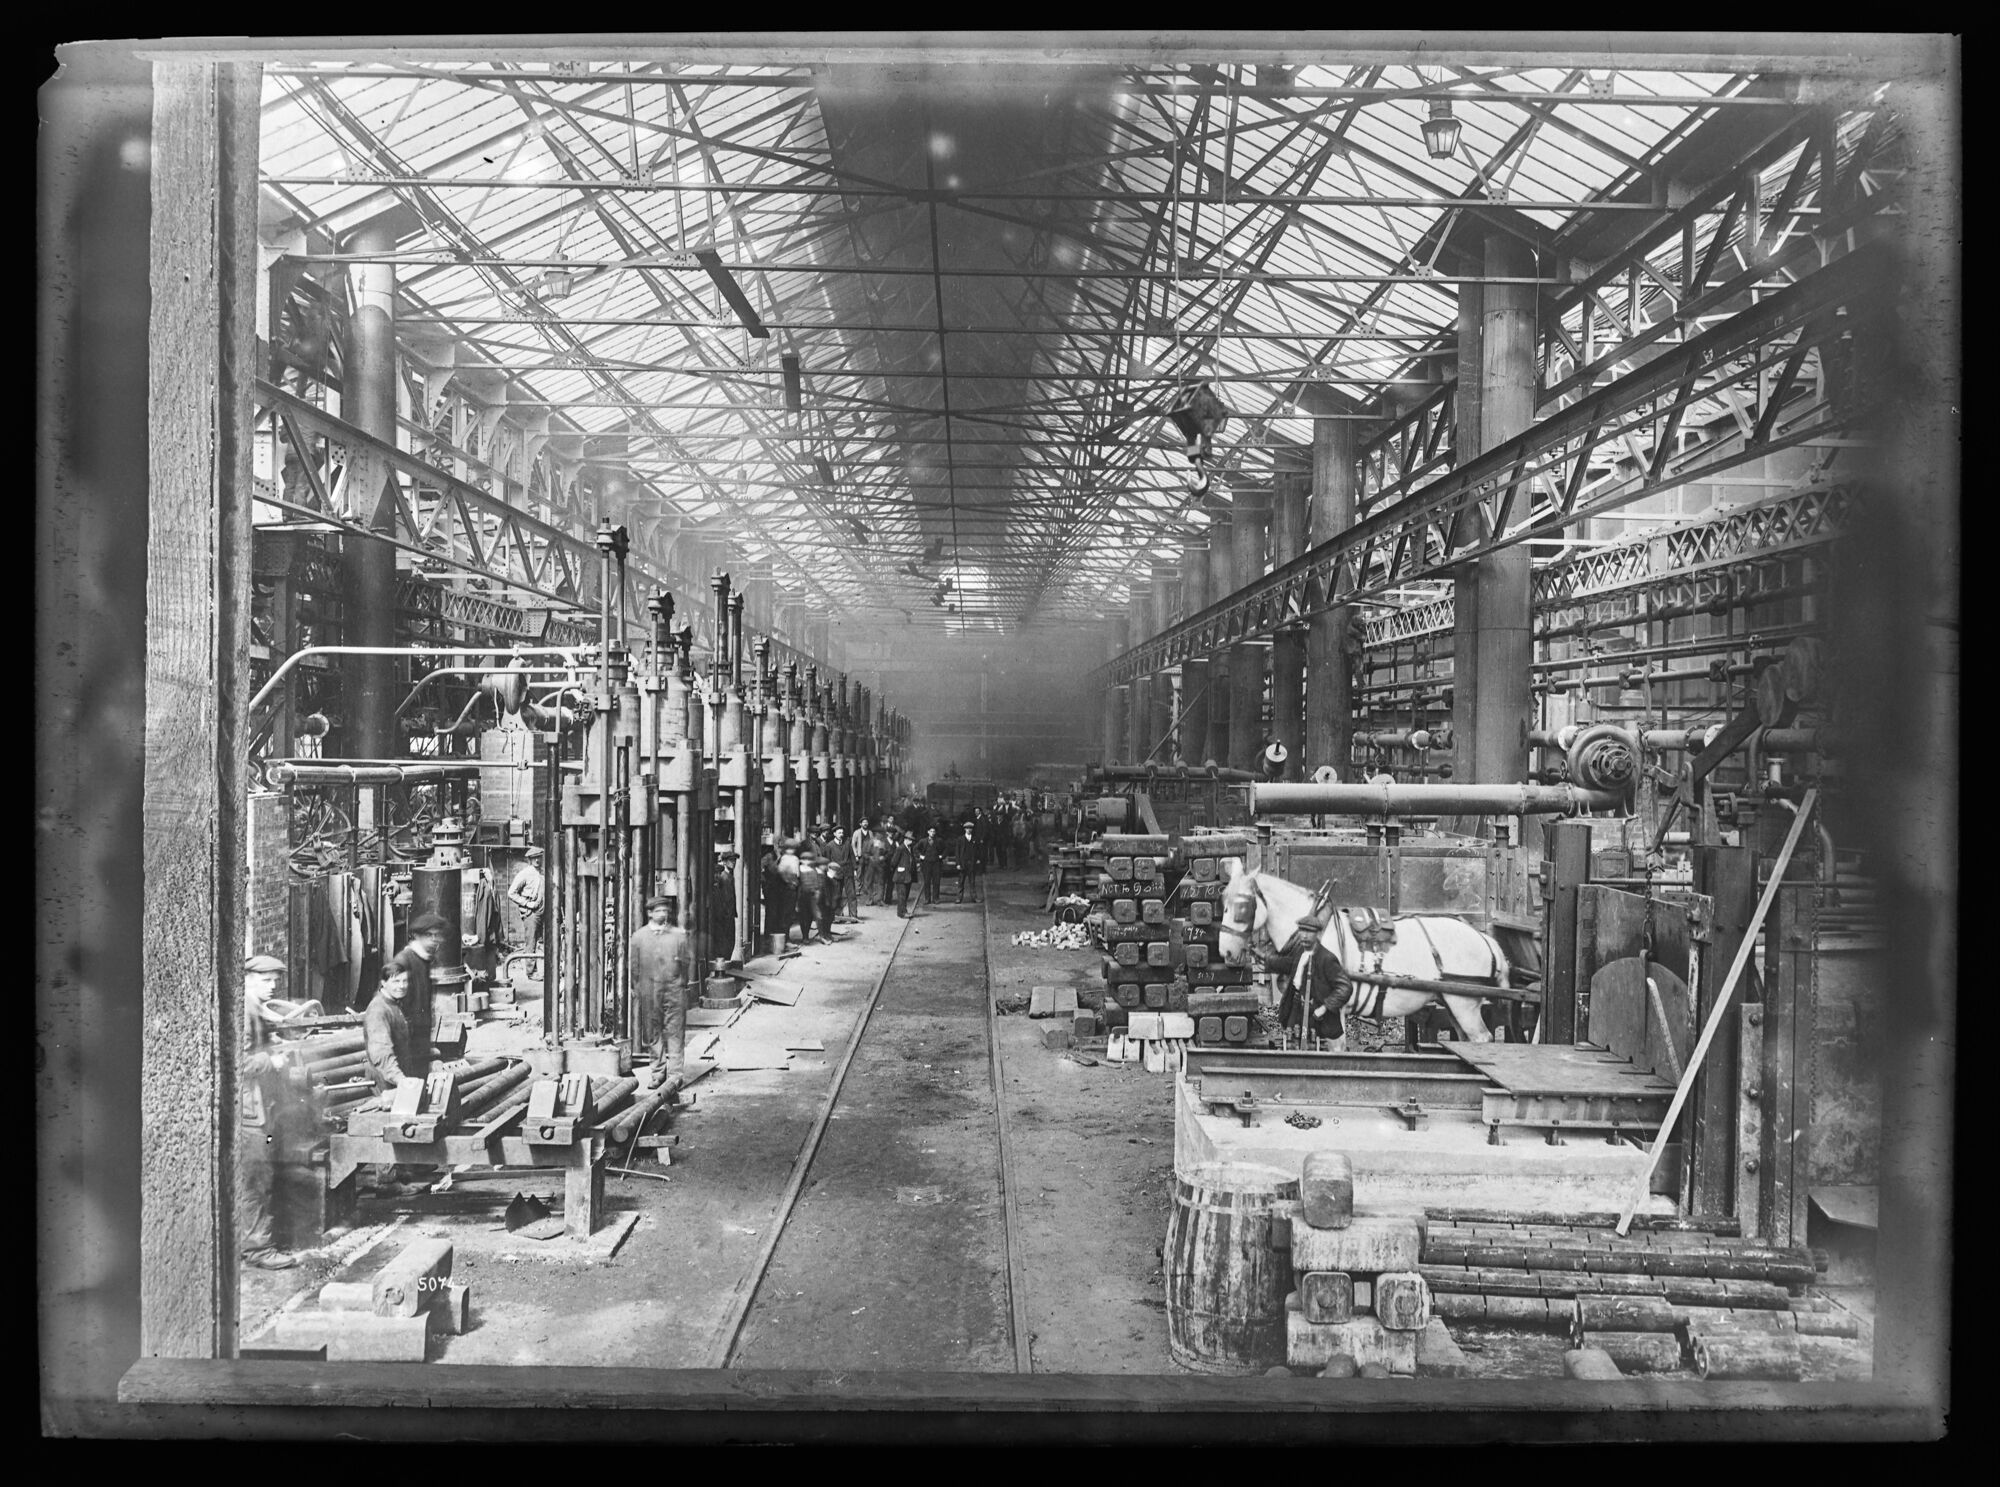 Horses working indoors, New Shell Shop, Vickers Ltd., Barrow-in-Furness